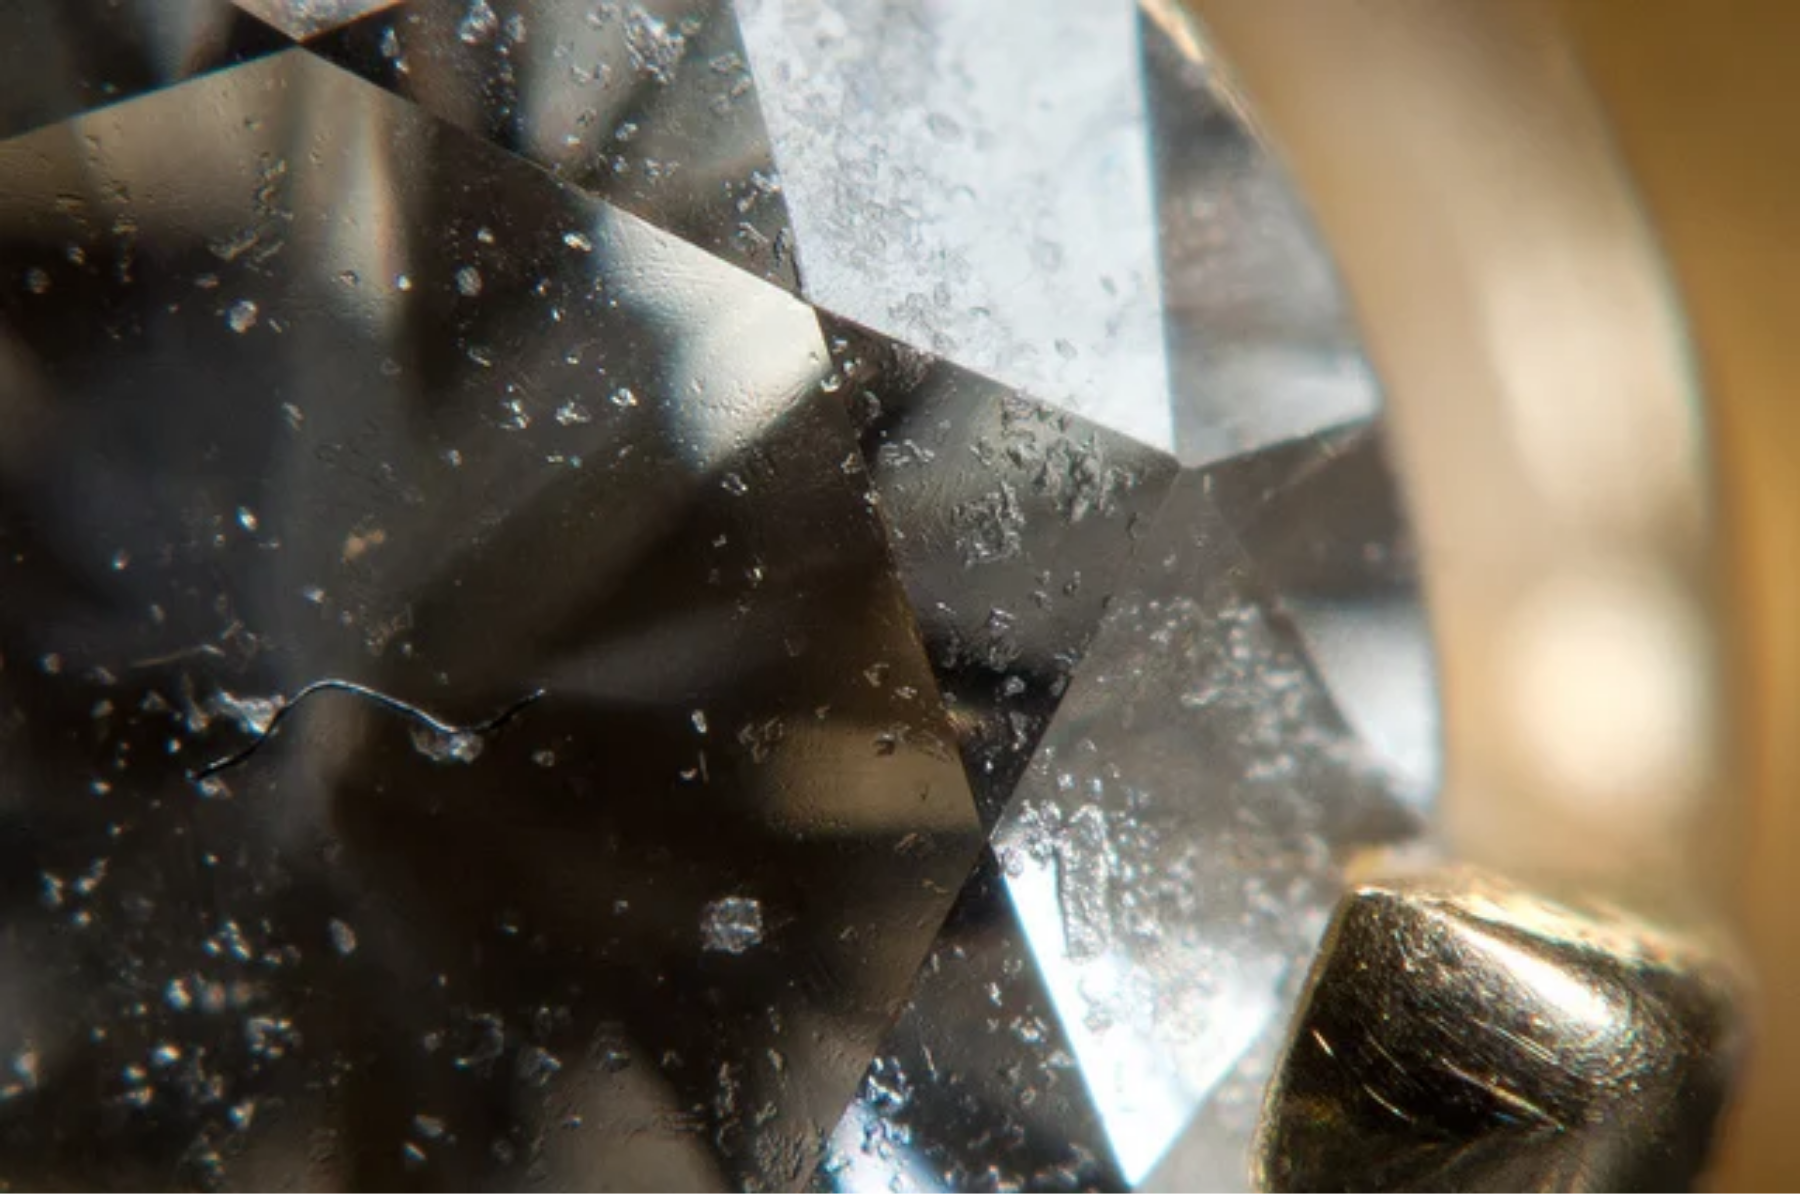 A close-up of a diamond, emphasizing its solid appearance